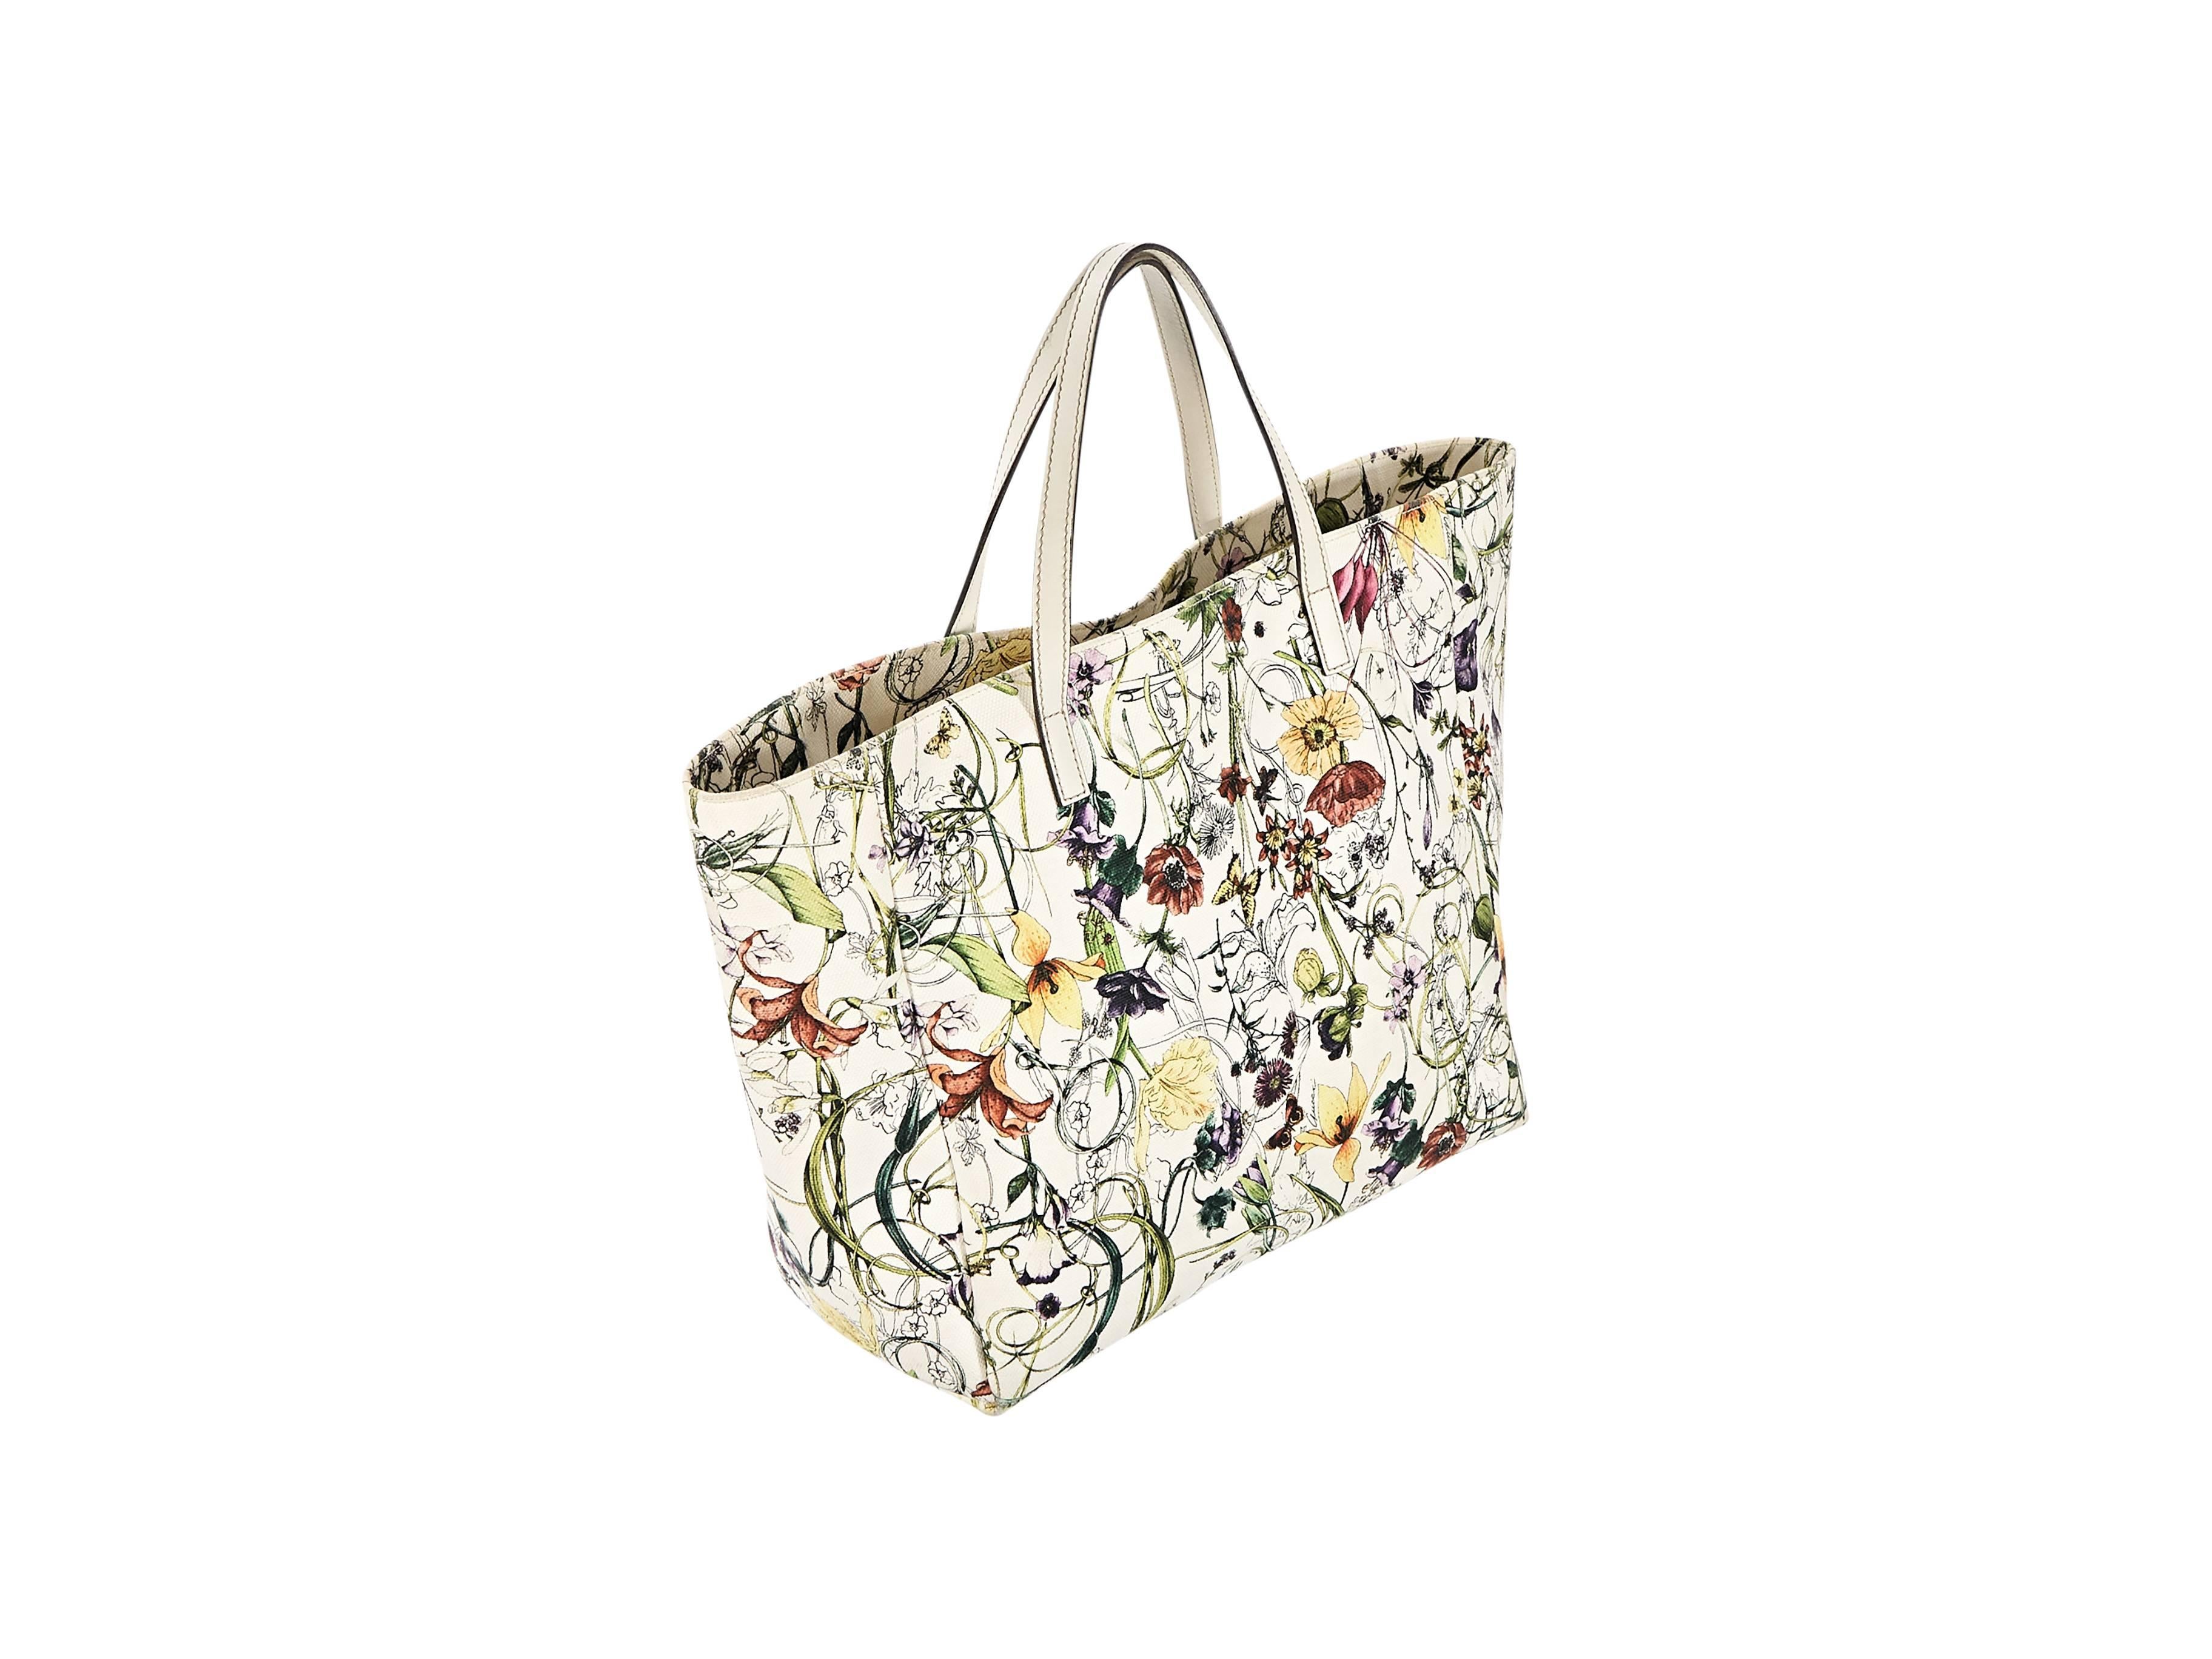 Product details:  Multicolor flora-printed Jolicoeur canvas tote bag by Gucci.  Top carry handles.  Open top.  Lined interior with inner zip and slide pockets.  12